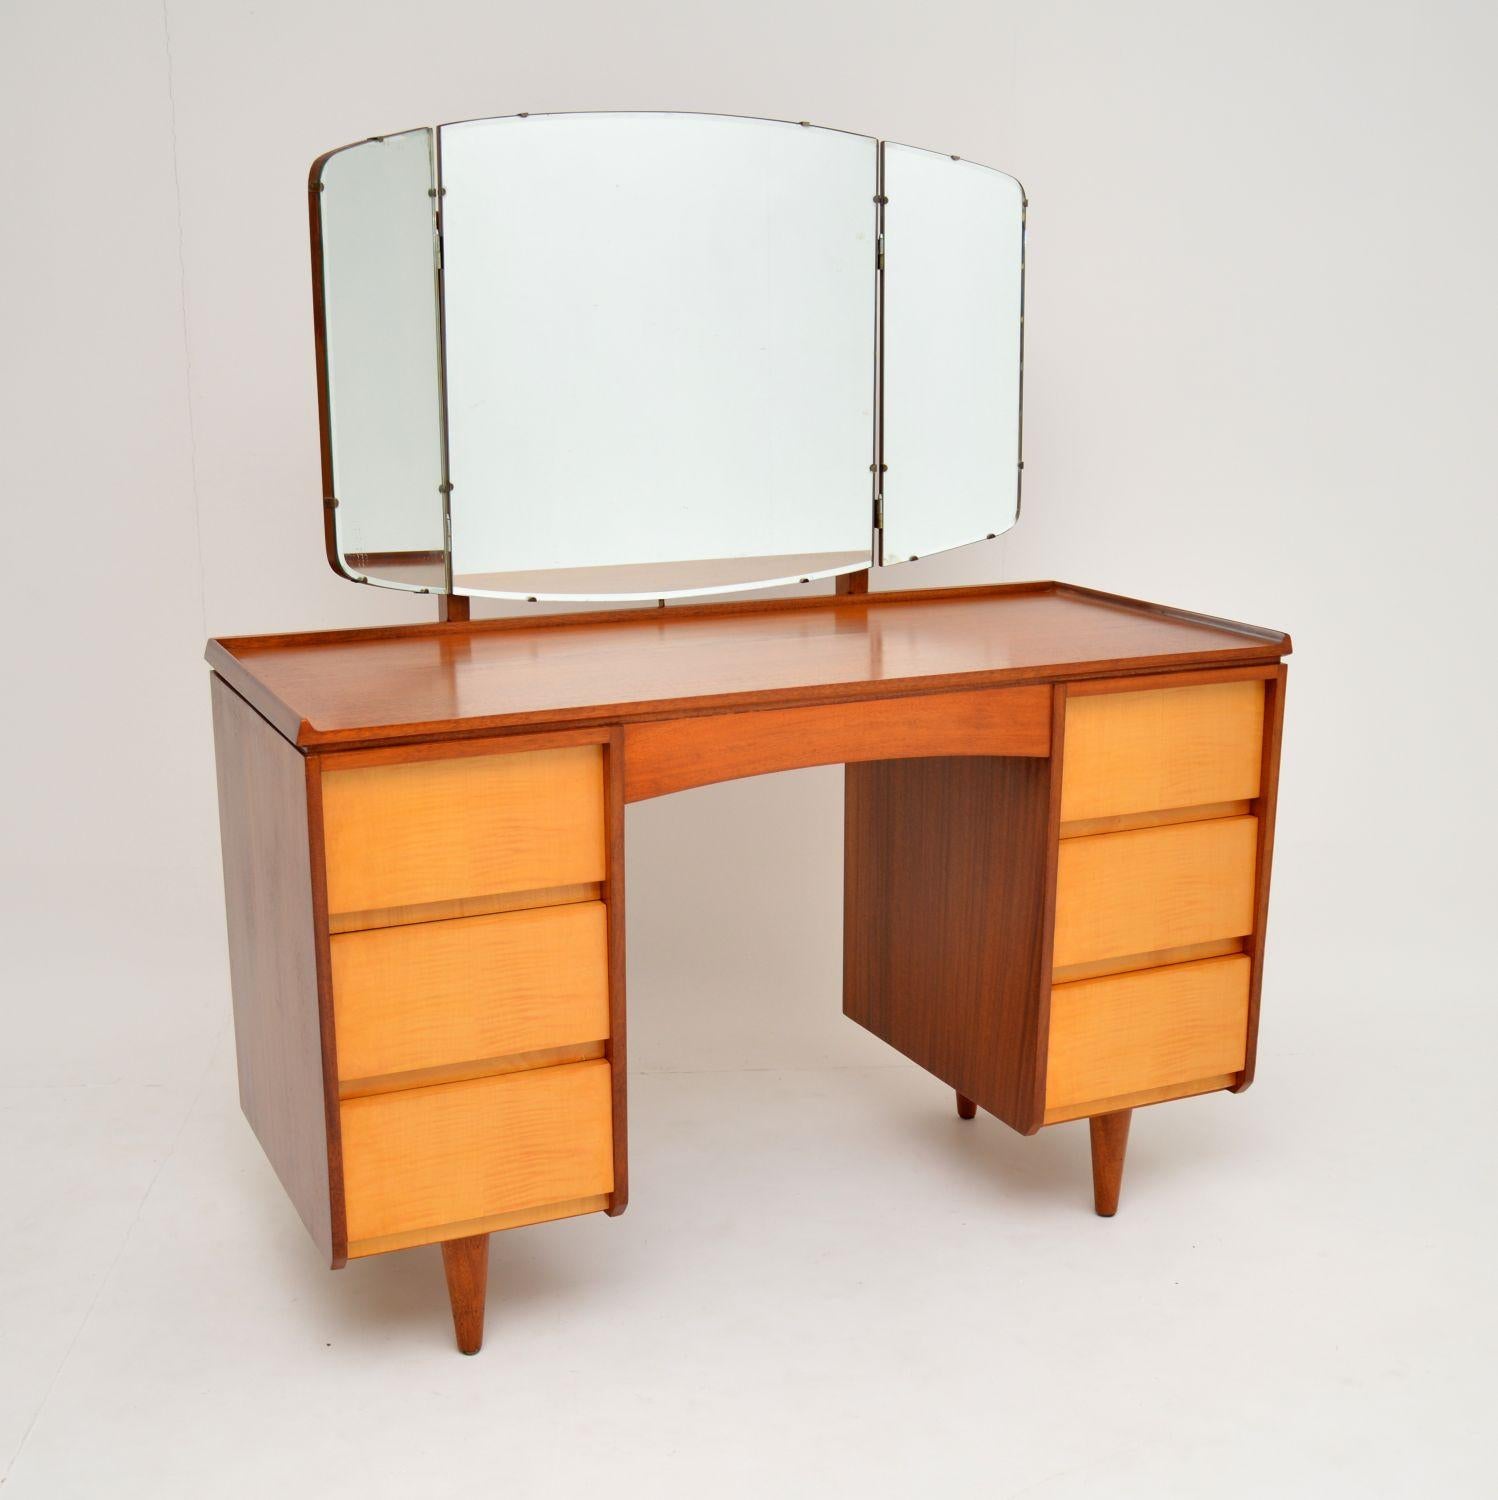 A beautiful vintage dressing table of super high quality, this dates from the 1960’s.

It has a walnut top and sides, with lovely sycamore fronted drawers. We have had this stripped and re-polished to a very high standard, the condition is superb